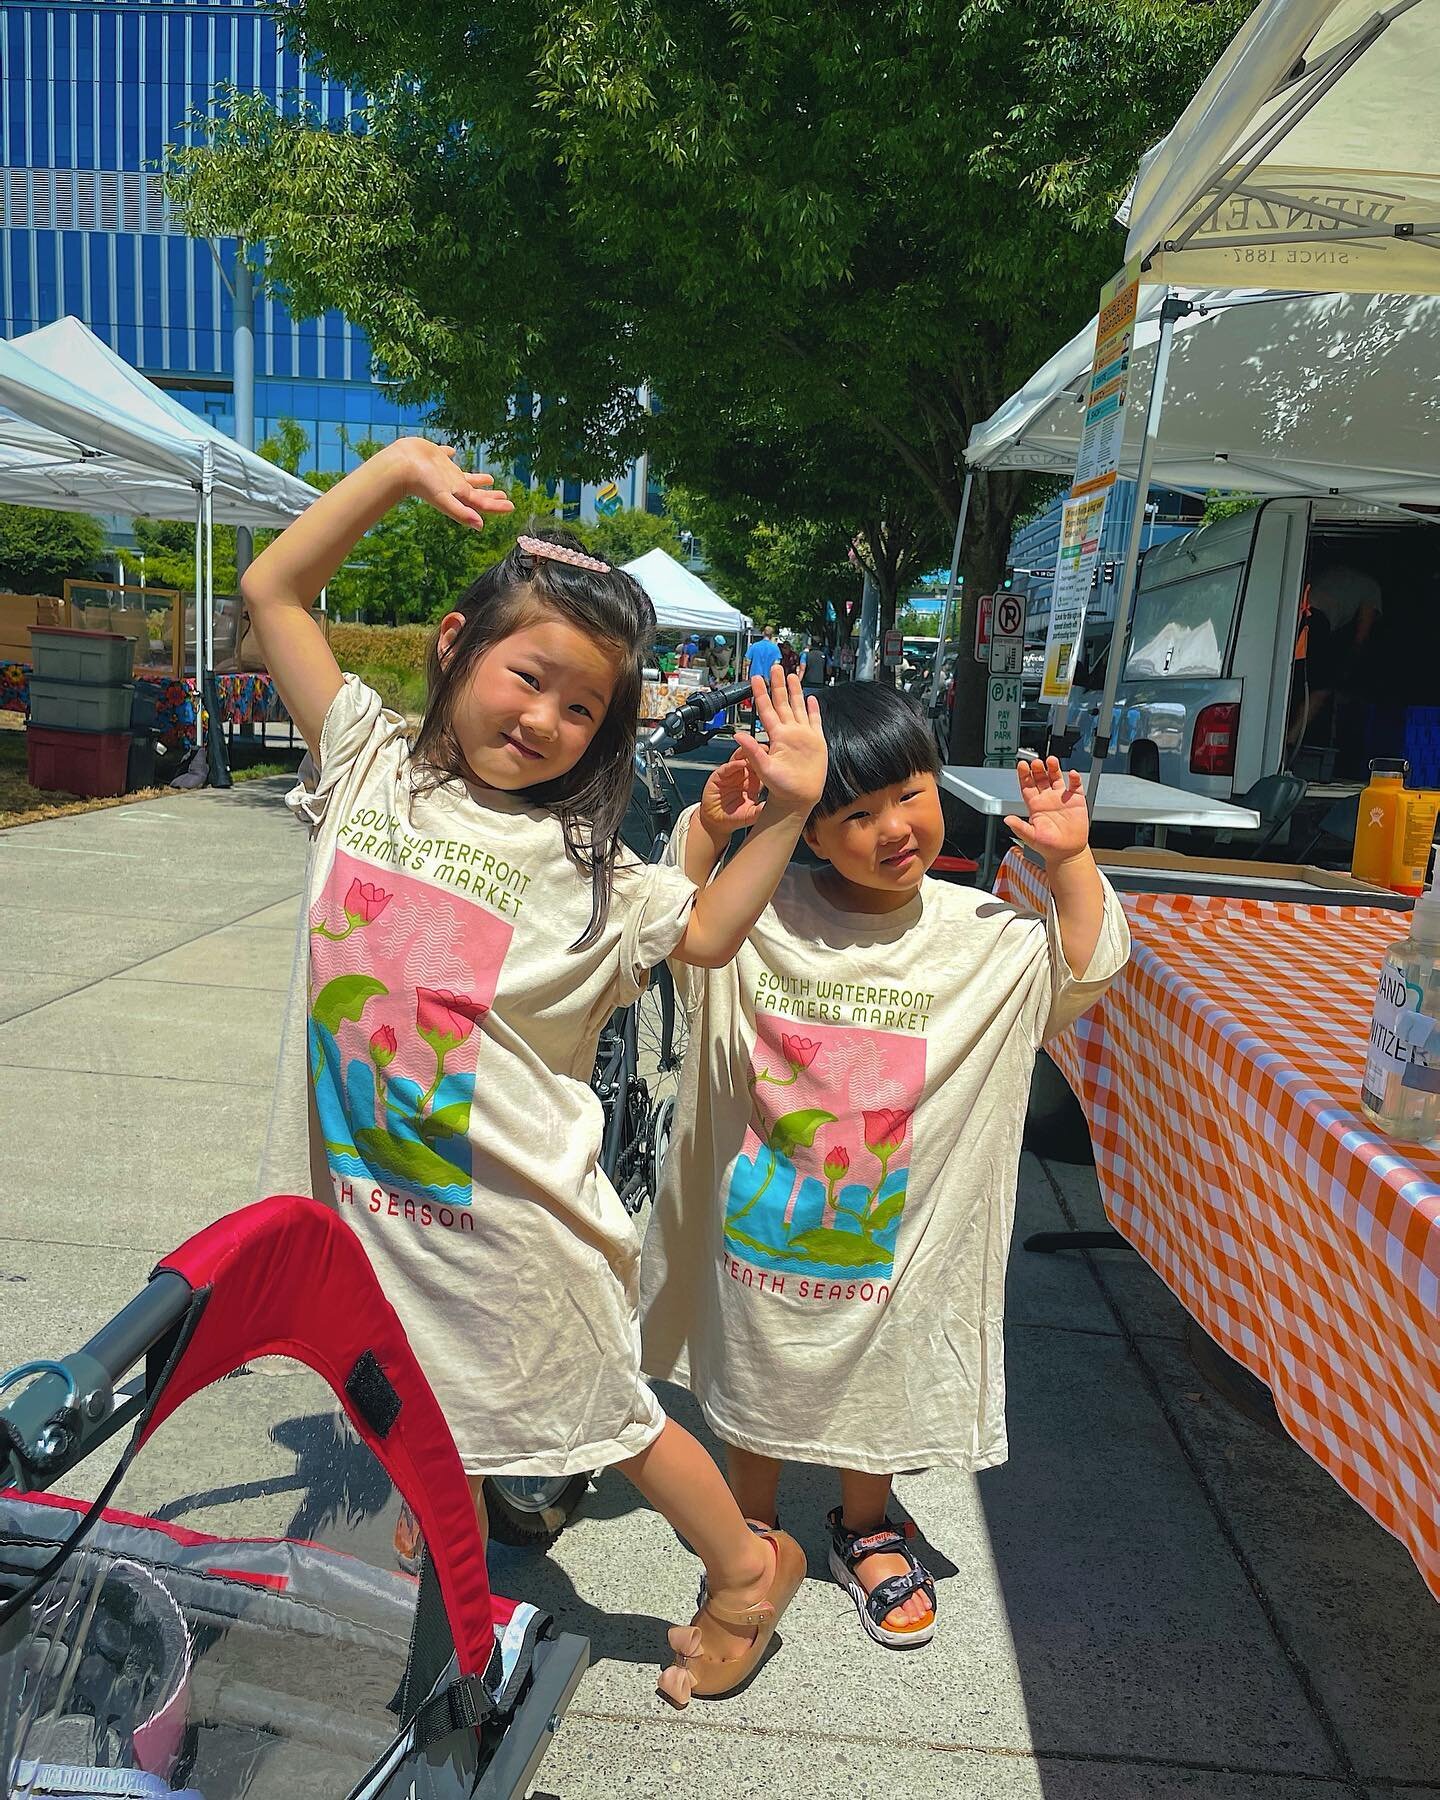 Two cutie pies sporting our 10th season market t-shirts. 😍❤️✨